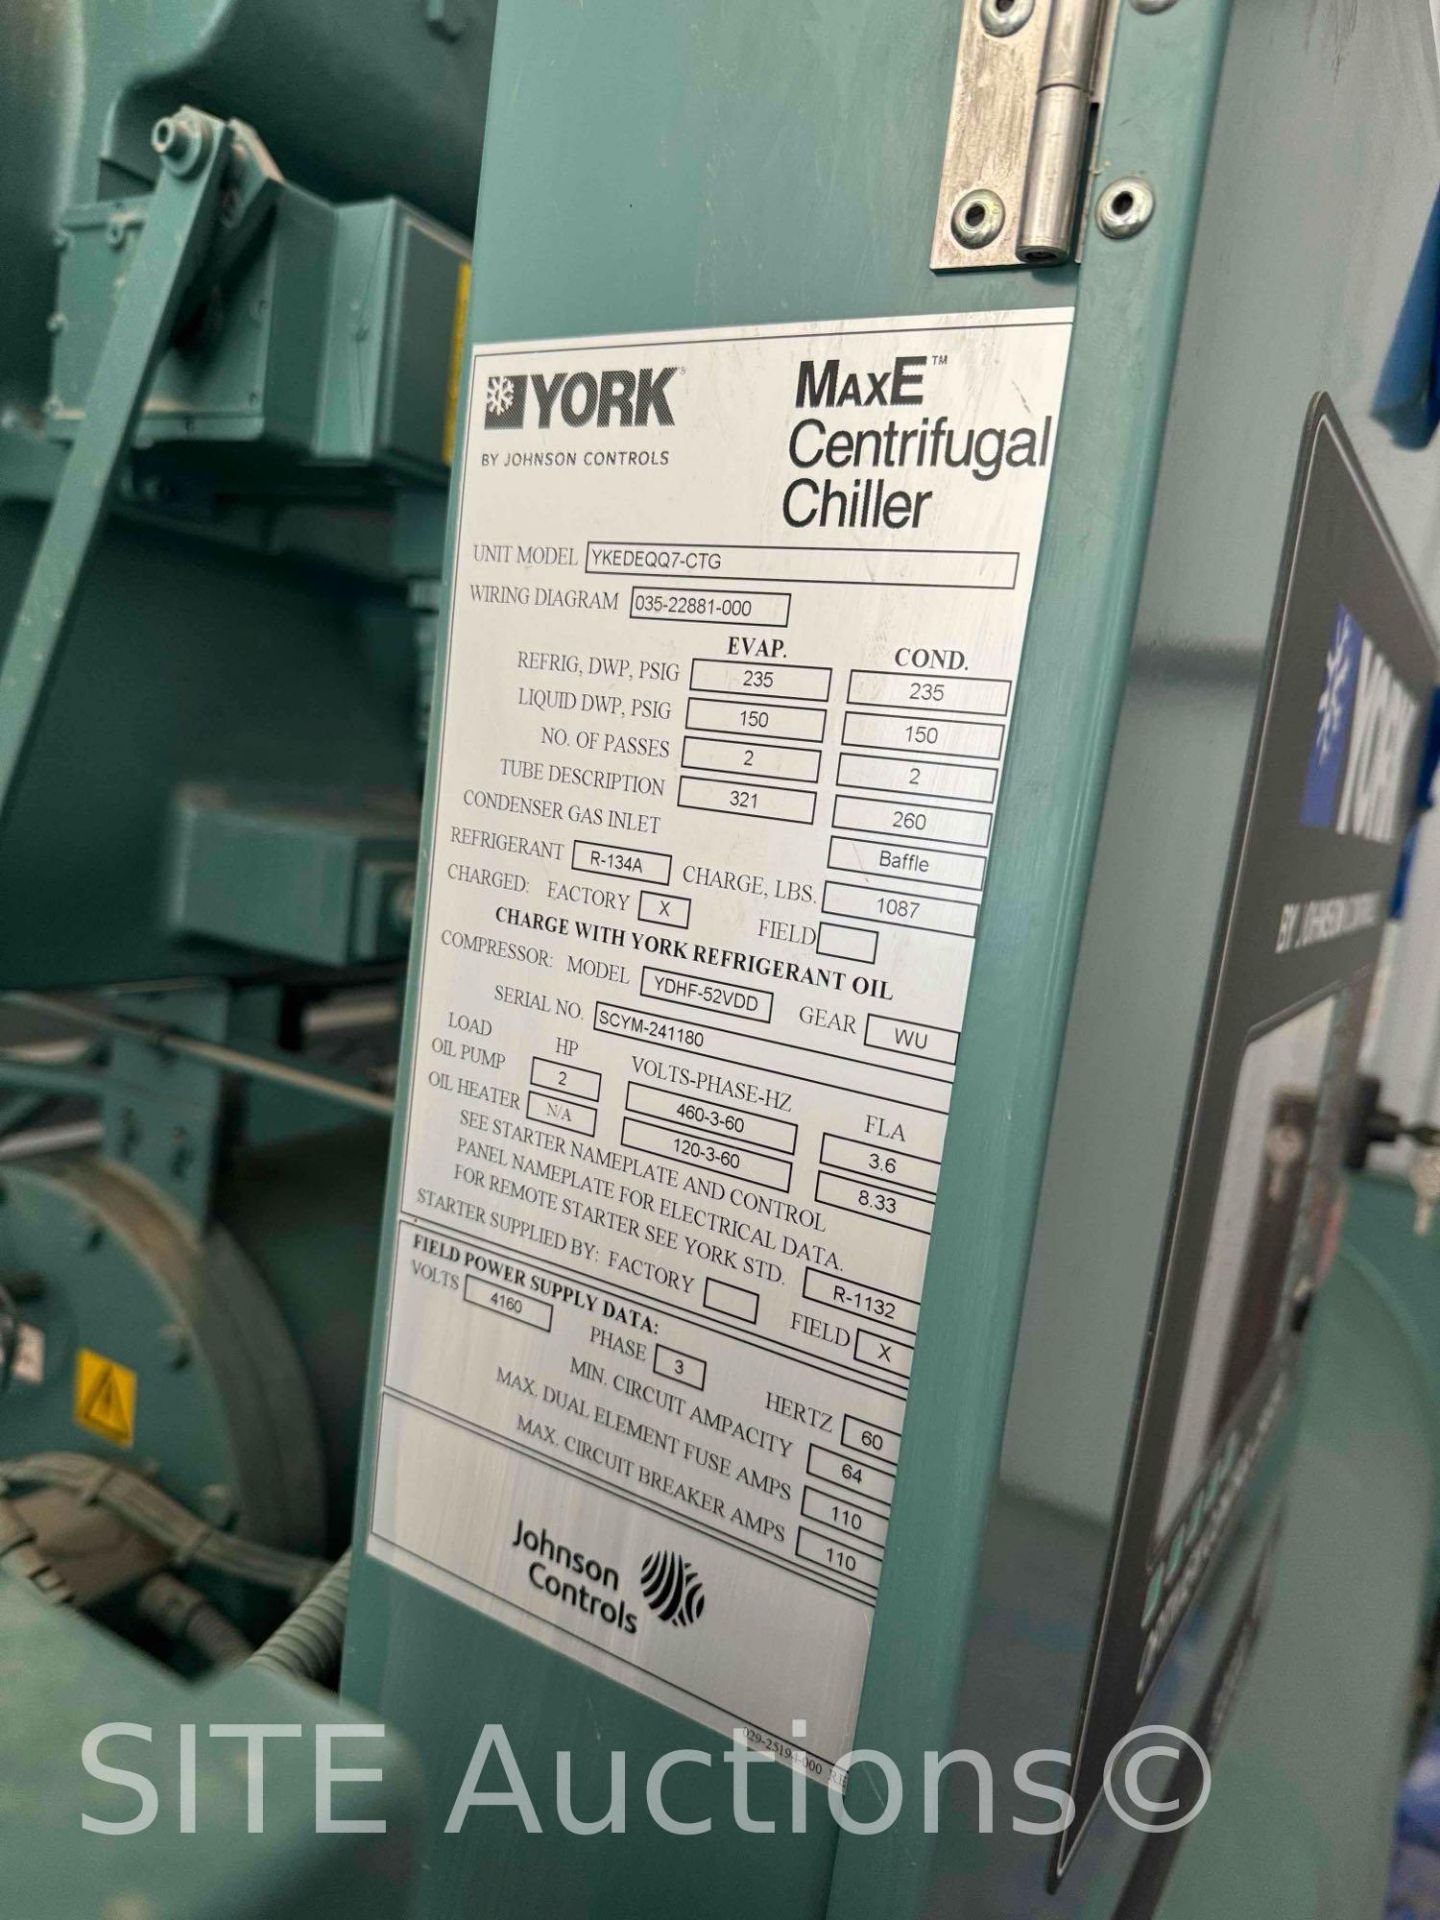 UNUSED 2012 York by Johnson Controls MaxE Centrifugal Chiller - Image 11 of 19